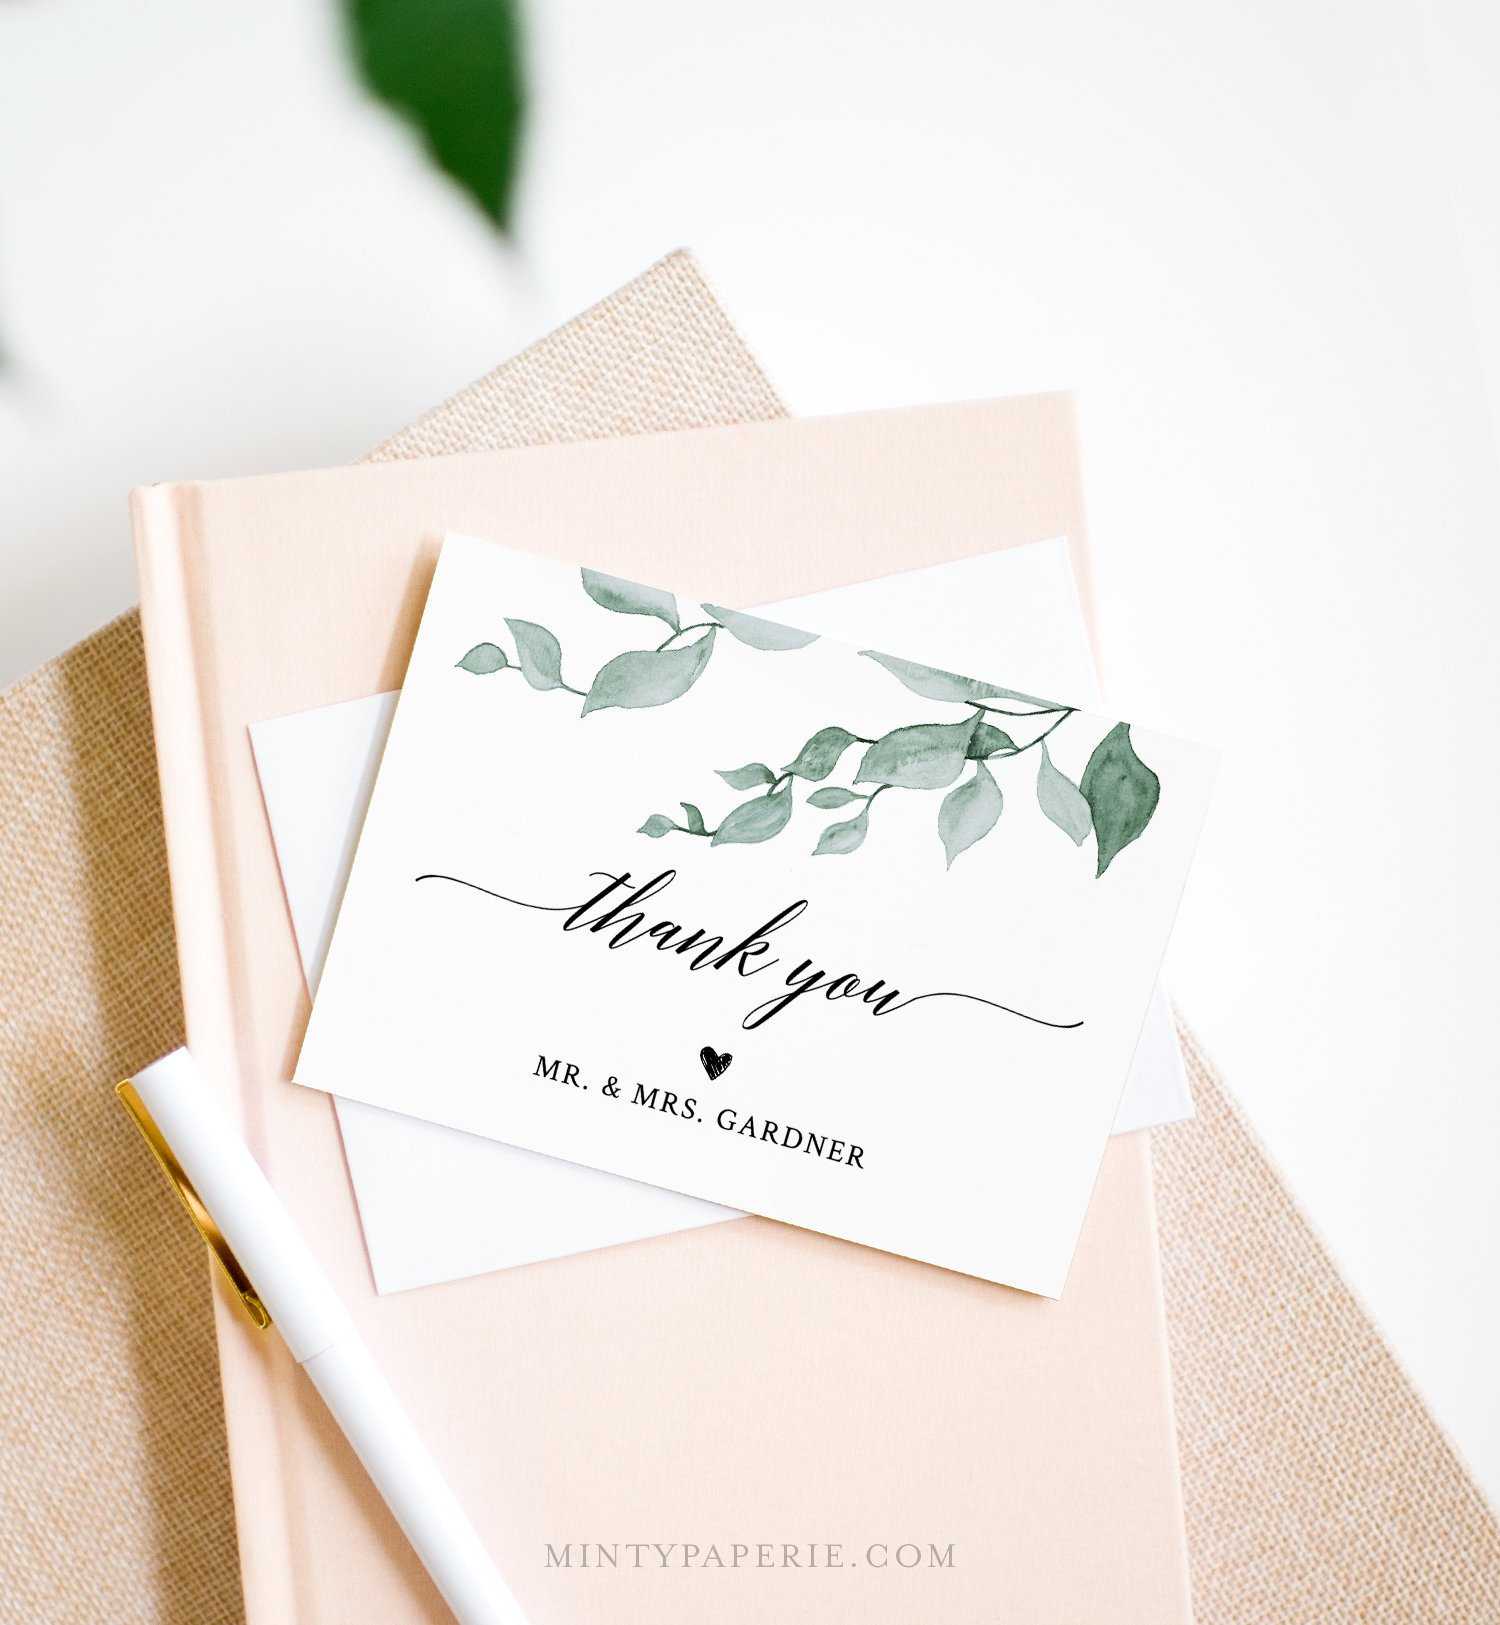 Greenery Thank You Note Card Template, Folded Wedding Or Pertaining To Thank You Note Card Template